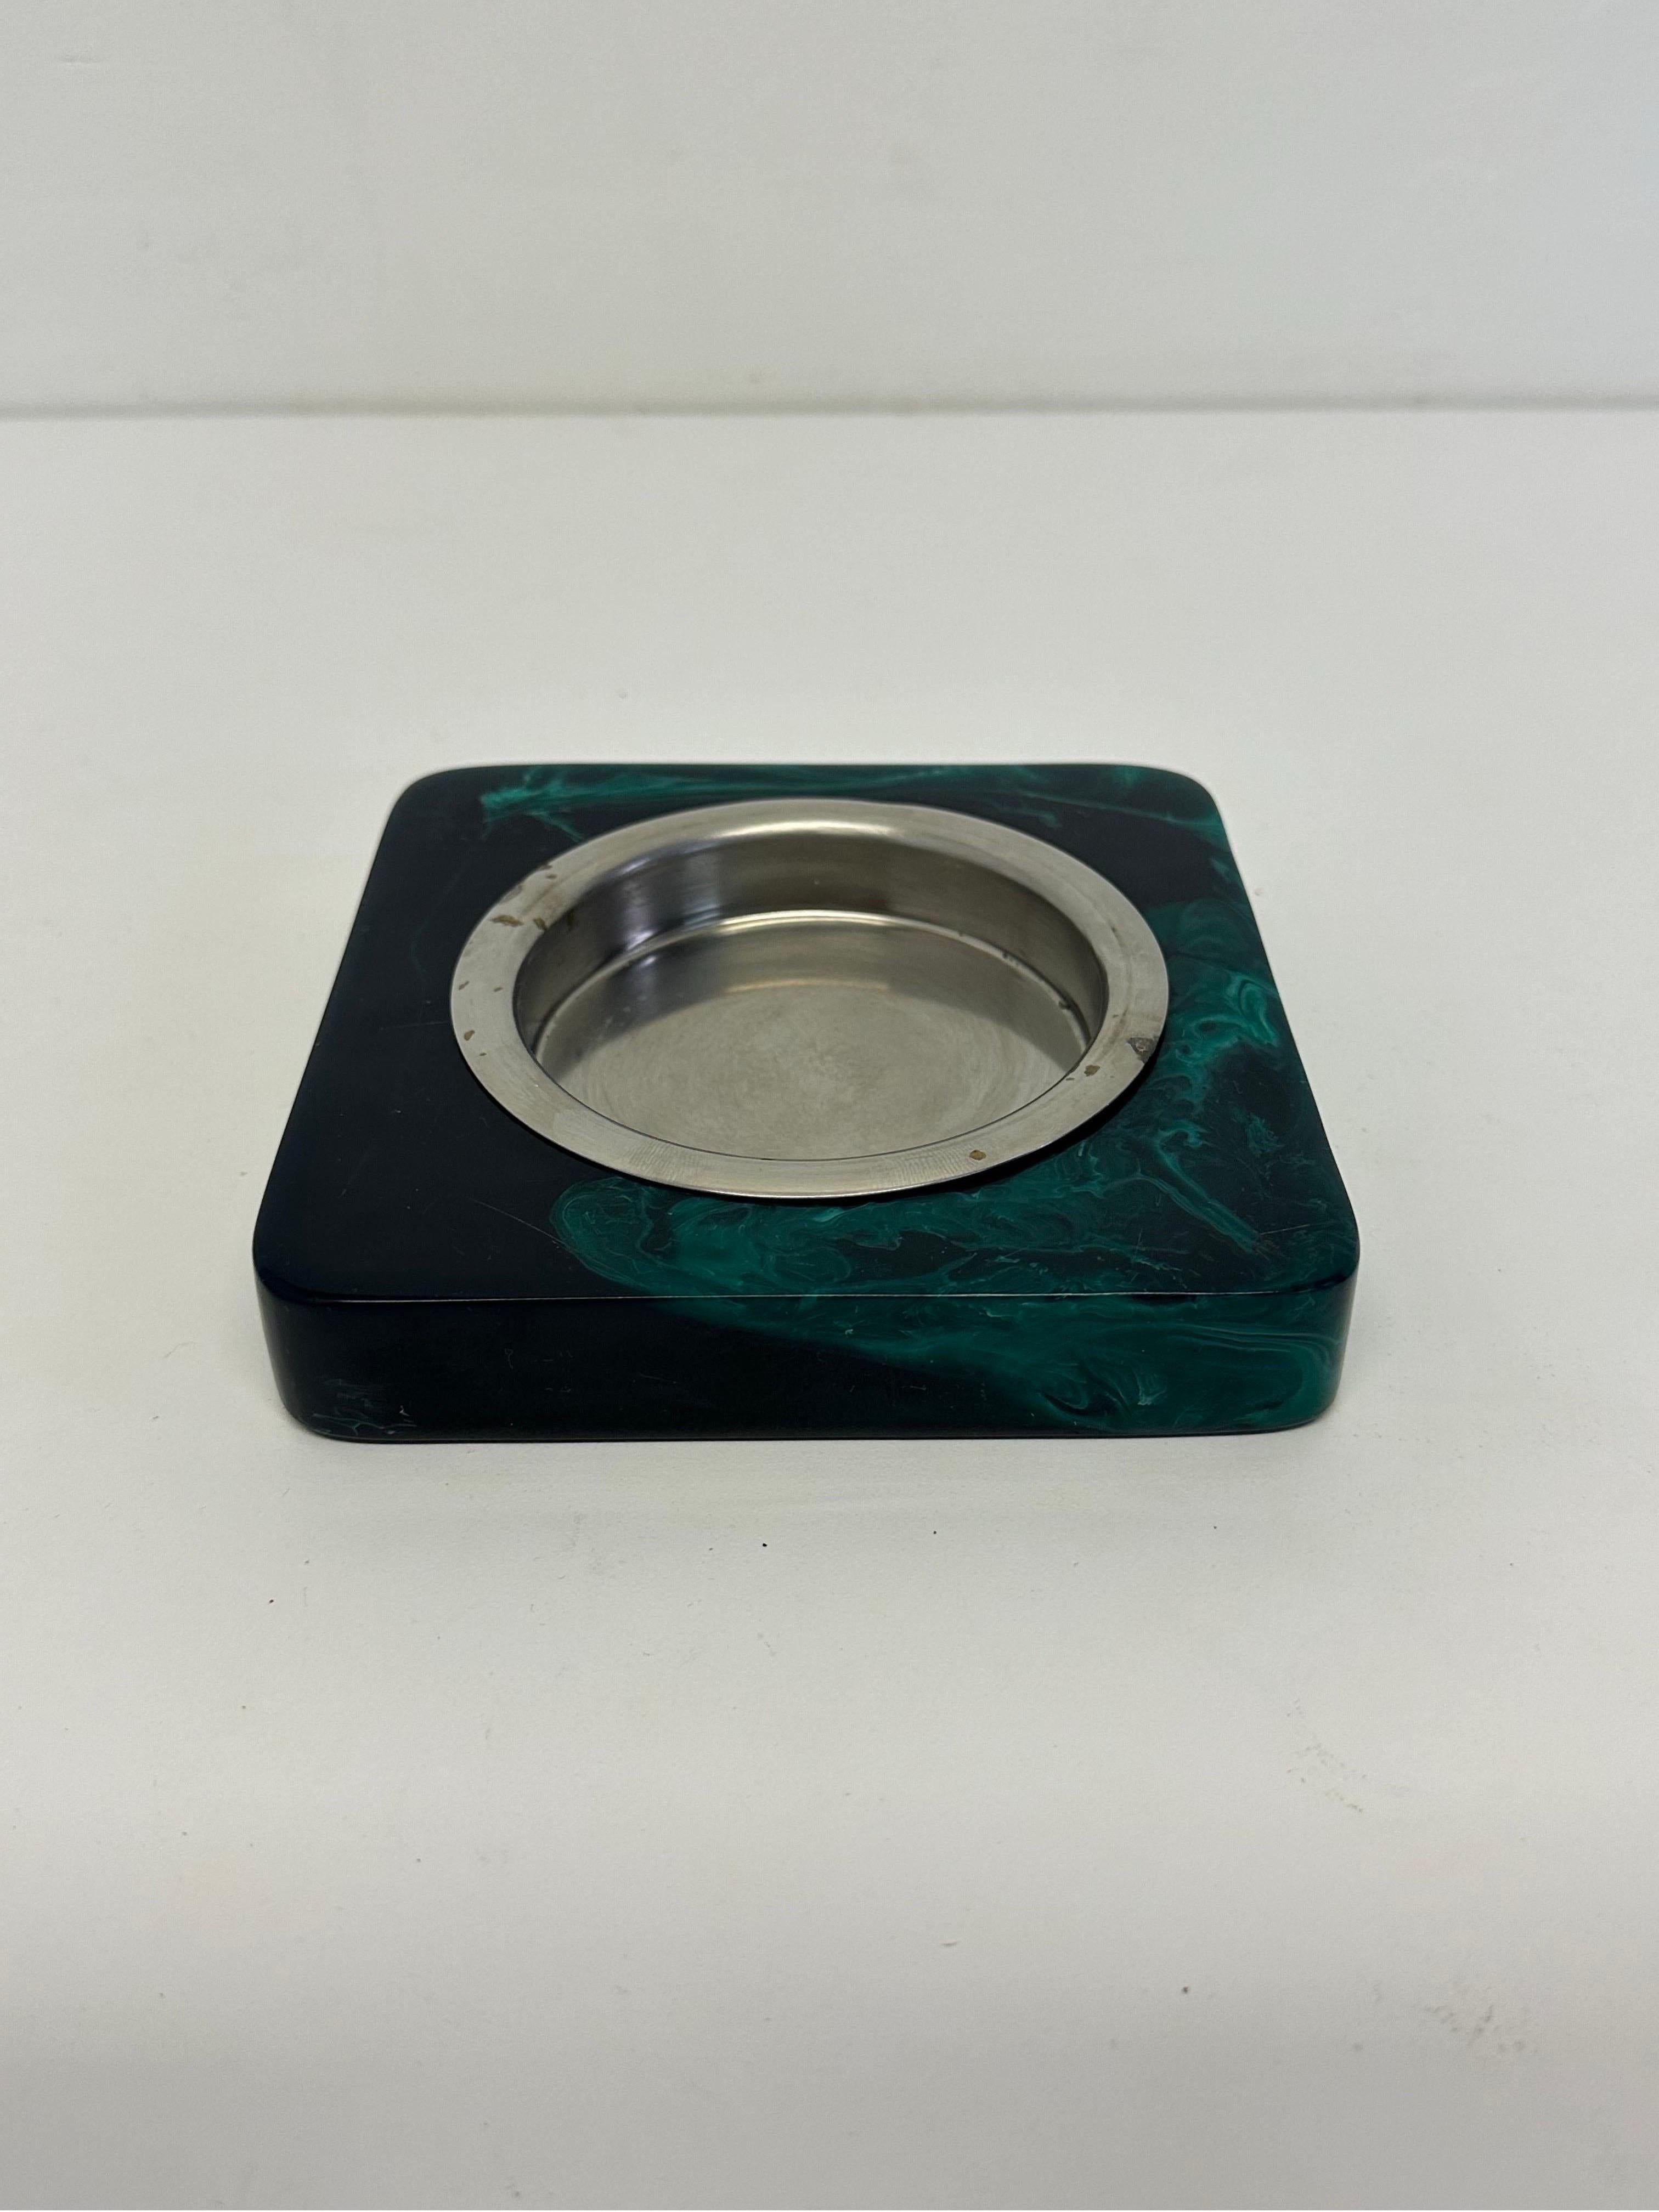 Mid-Century faux malachite resin base with removable silver tray insert from Brazil, 1960s.  Good to use as an ashtray or catch all.